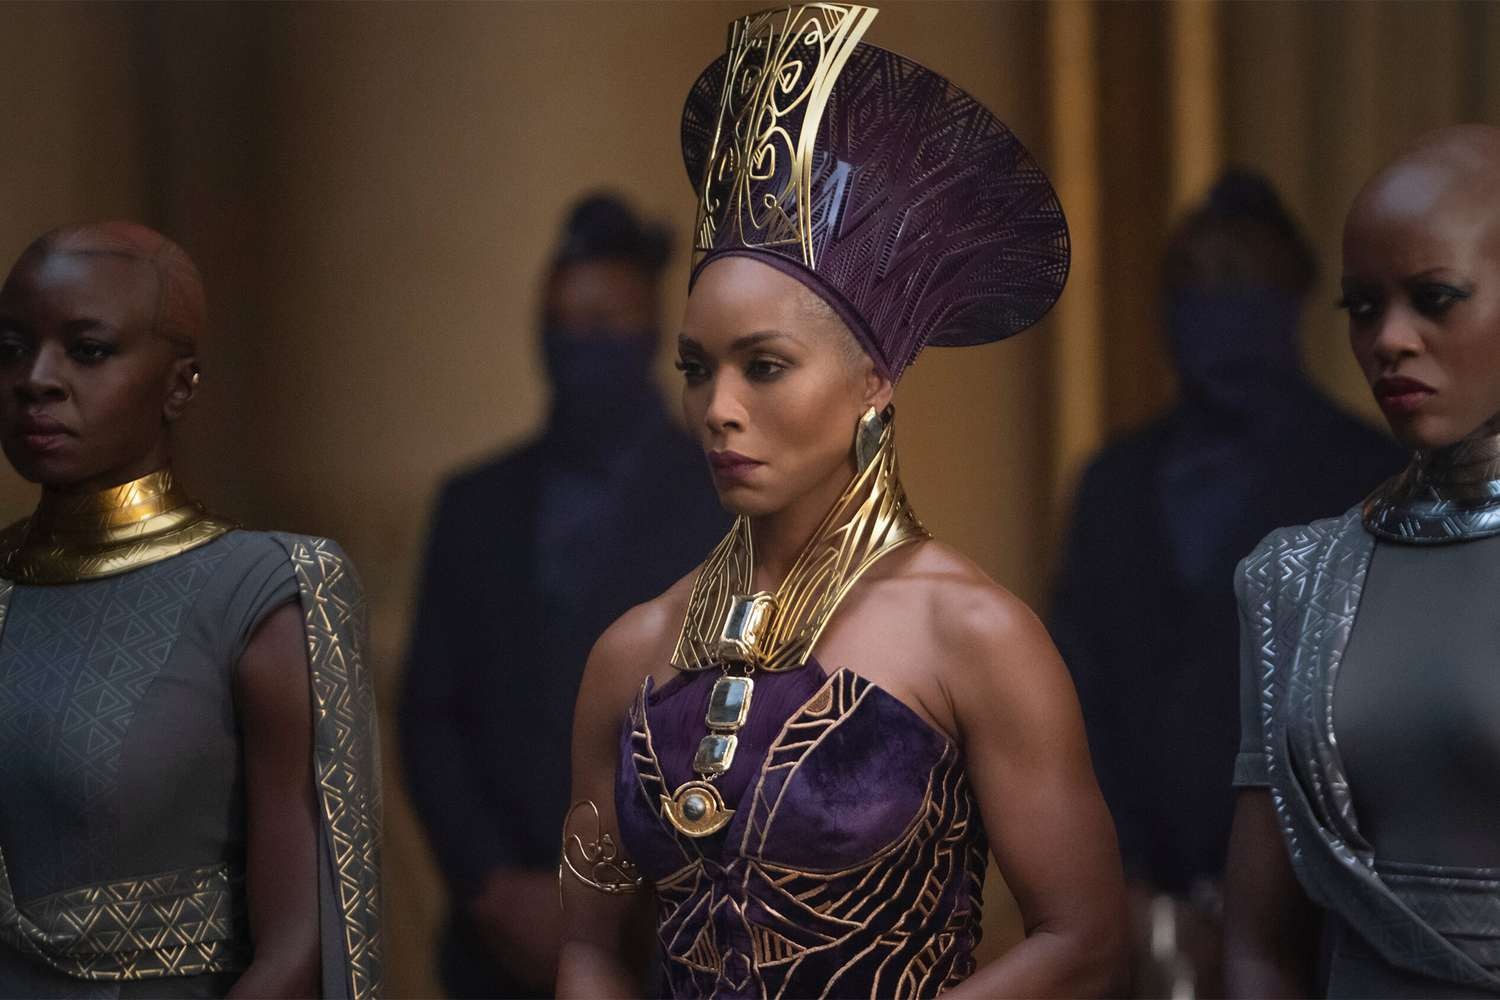 Angela Bassett was snubbed of anOsar for her incredible portrayal of Queen Ramonda in Black Panther 2